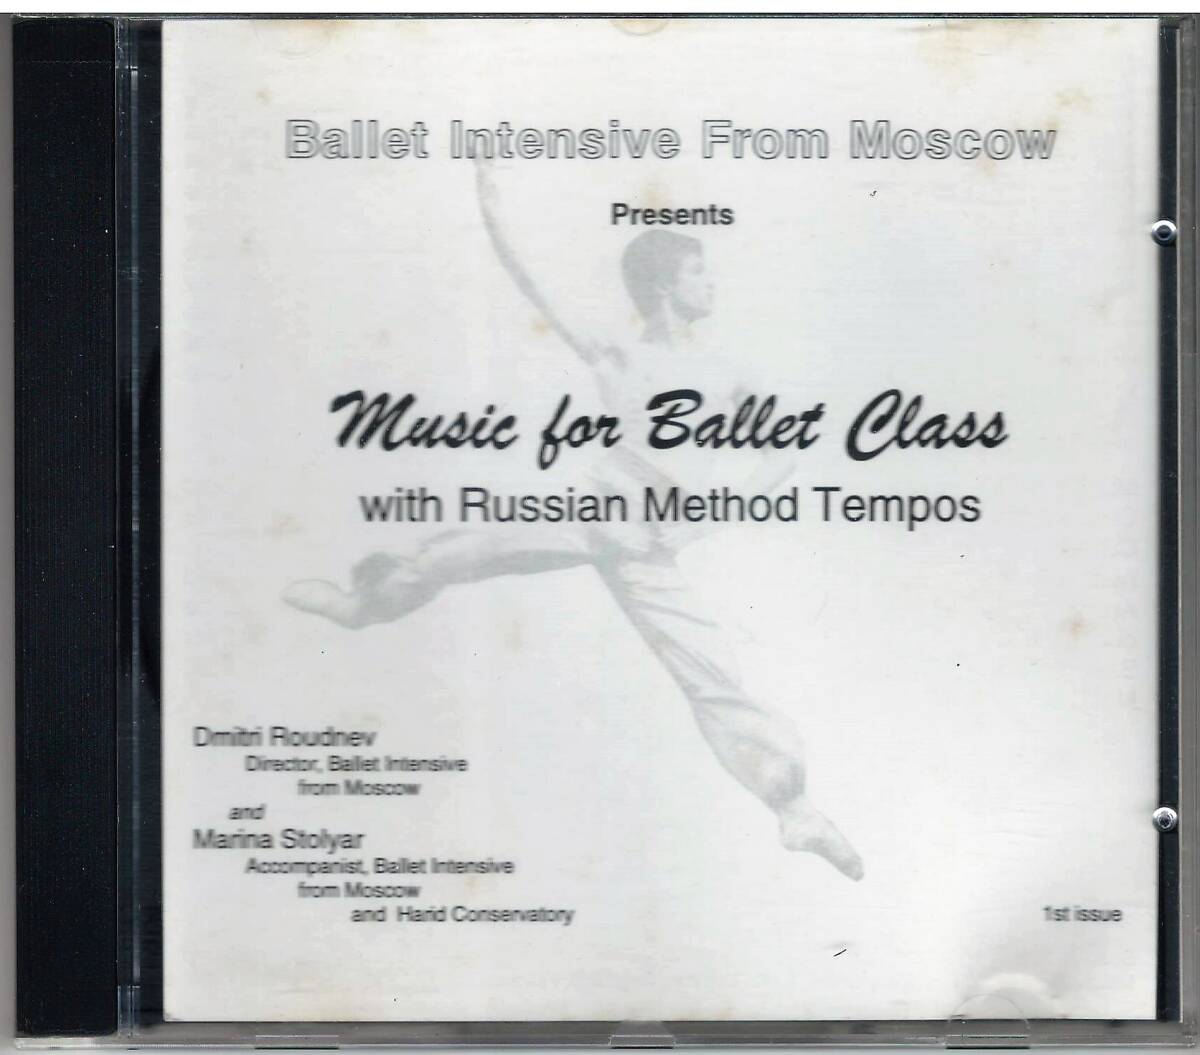 Dmitri Roudnev & Marina Stolyar「Ballet Intensive From Moscow Beautiful Class Music 1st Edition」バレエレッスン CD 送料込の画像1